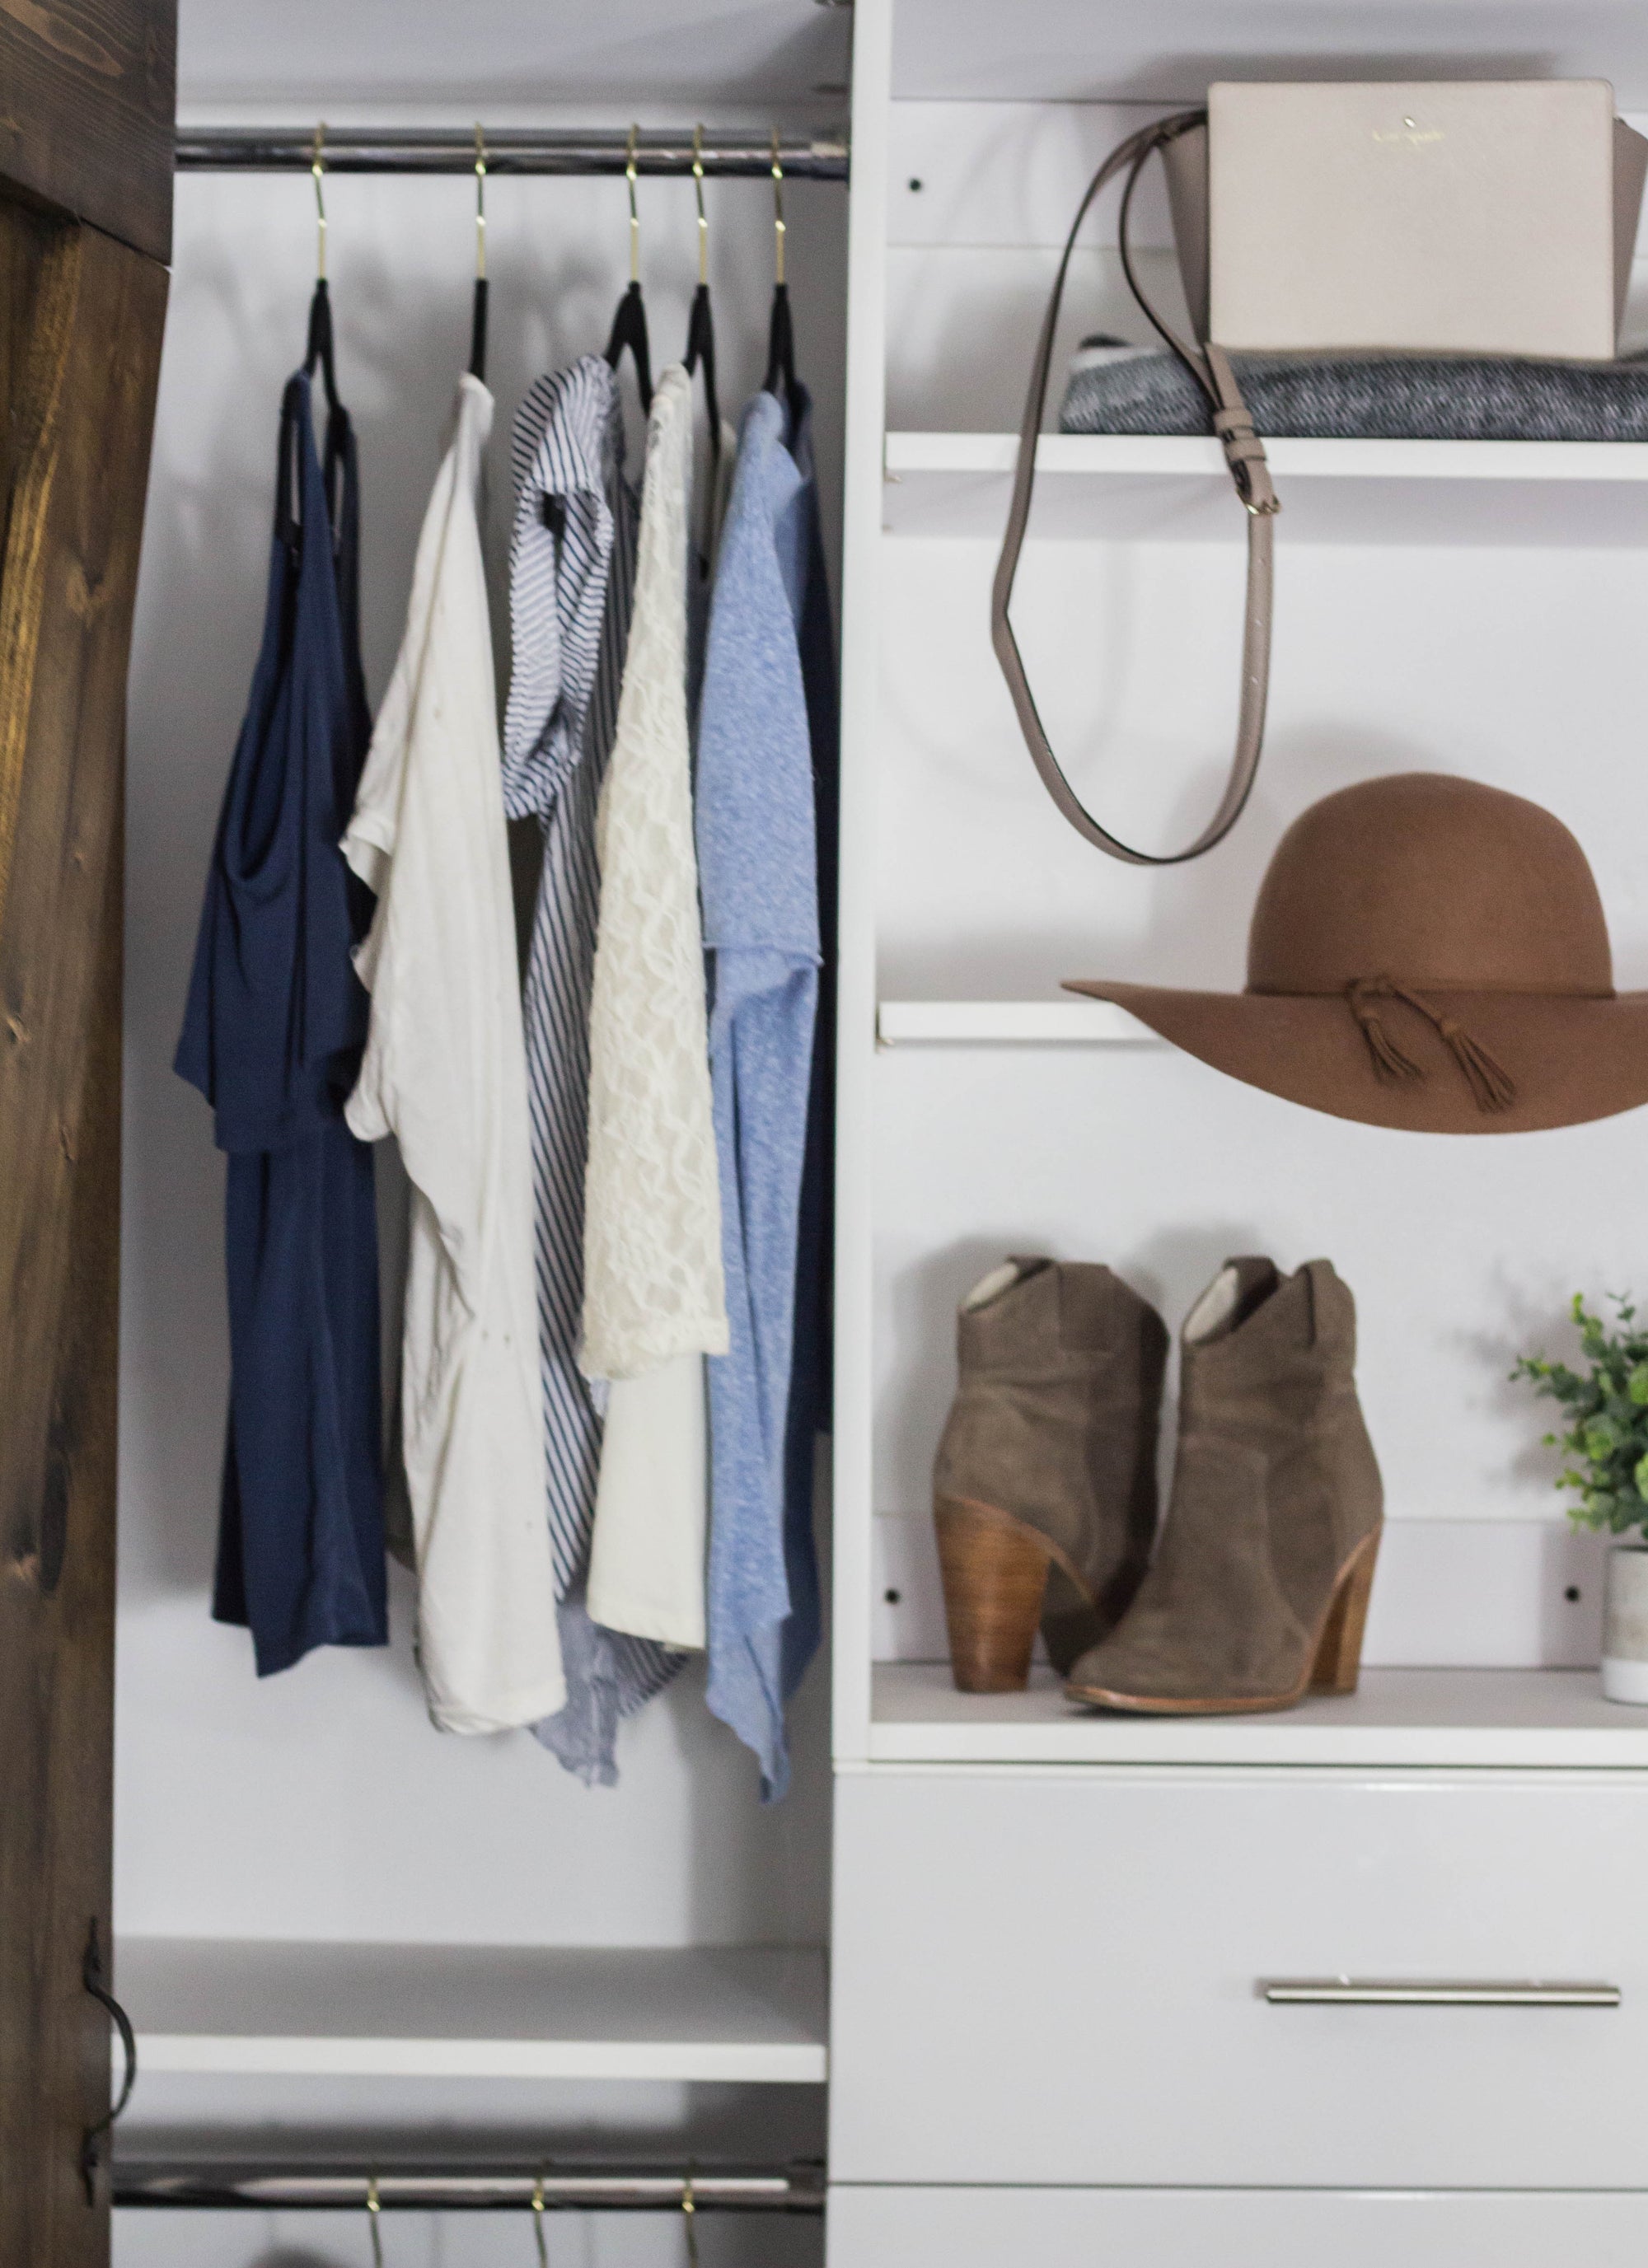 3 Easy Steps to De-Clutter Your Closet for an Organizational Makeover